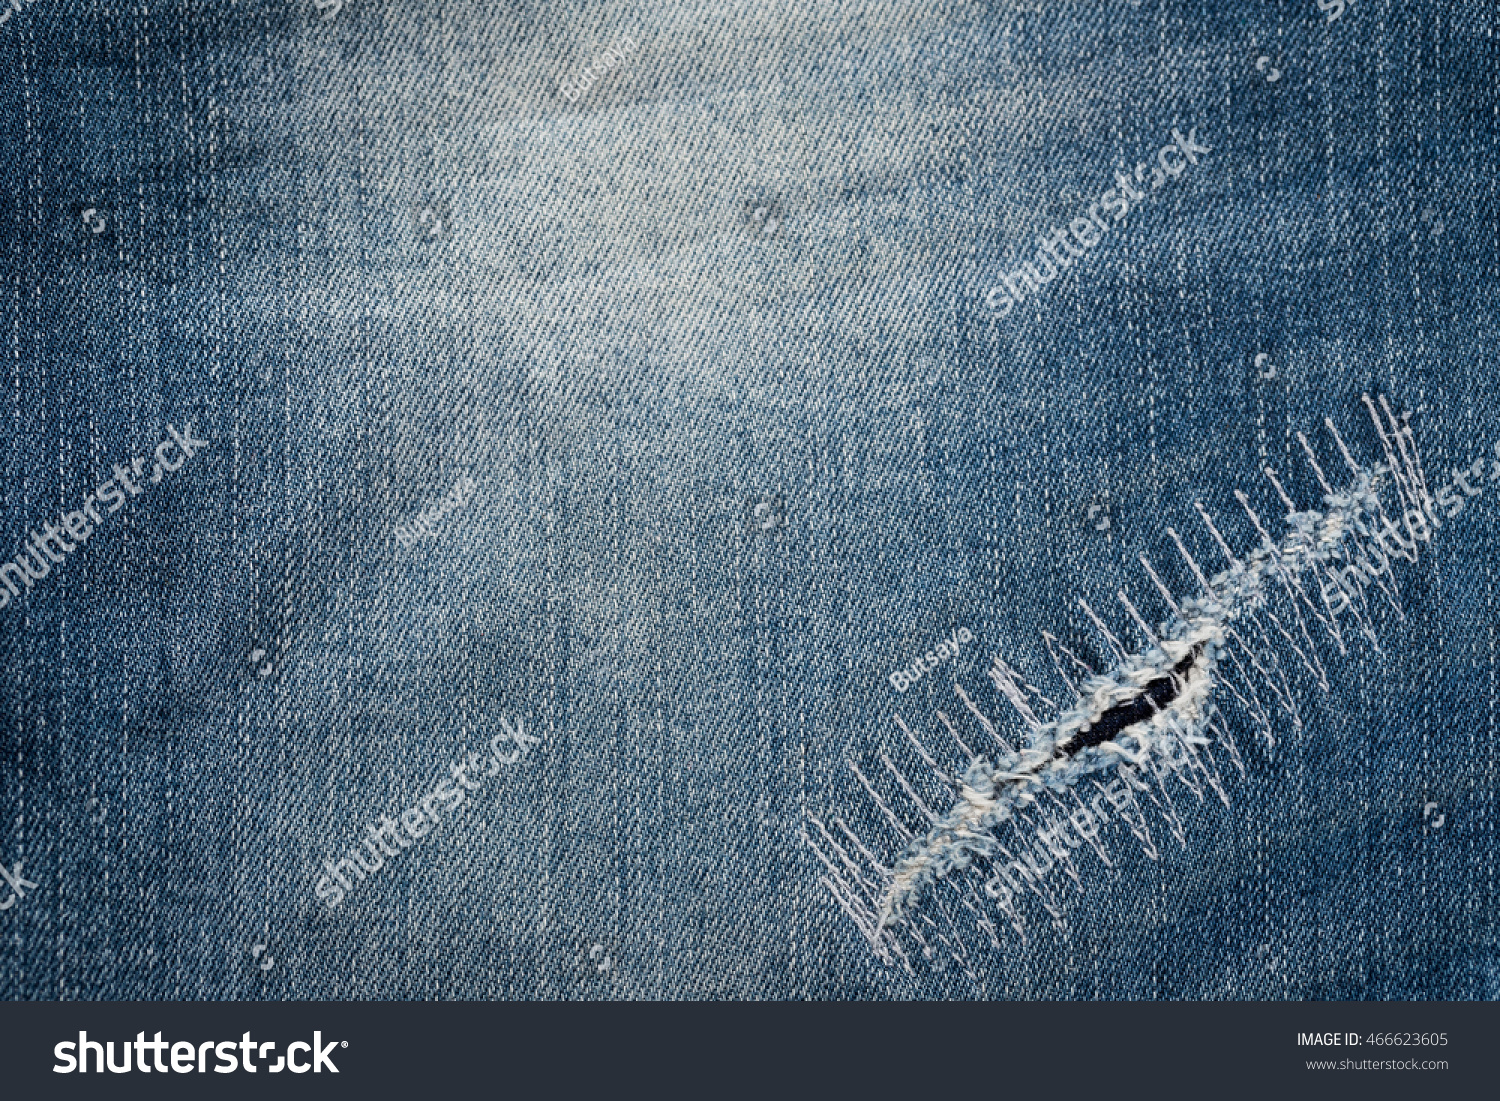 29,945 Ripped jeans background Images, Stock Photos & Vectors ...